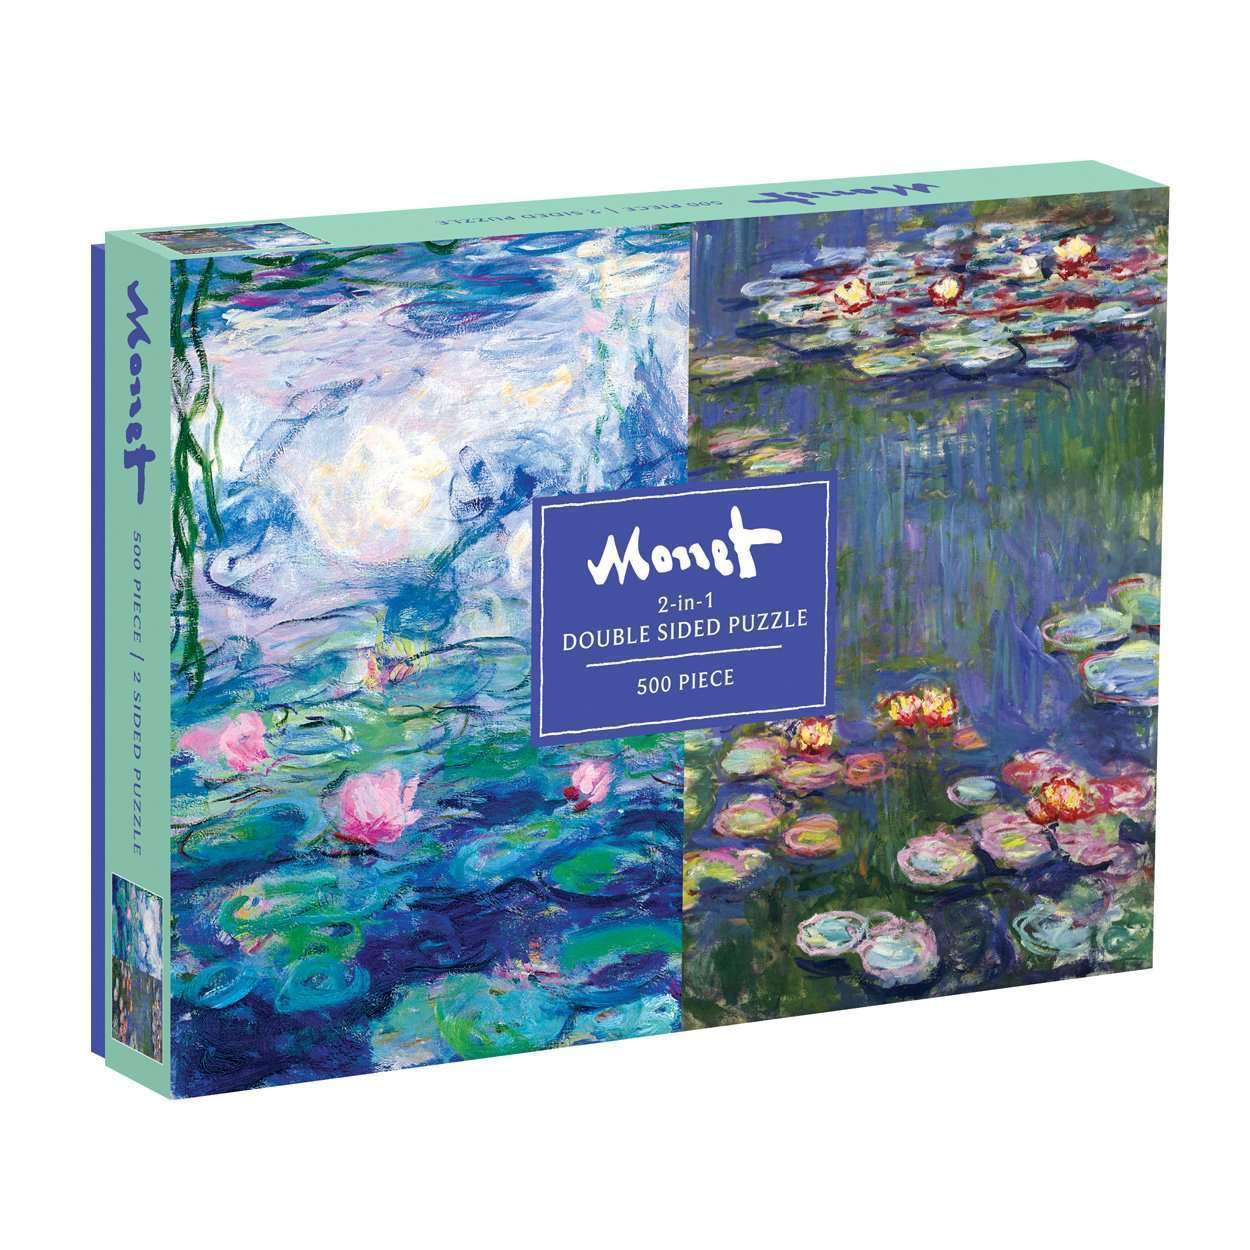 Monet 2-in-1 Double Sided Puzzle (500 pc)